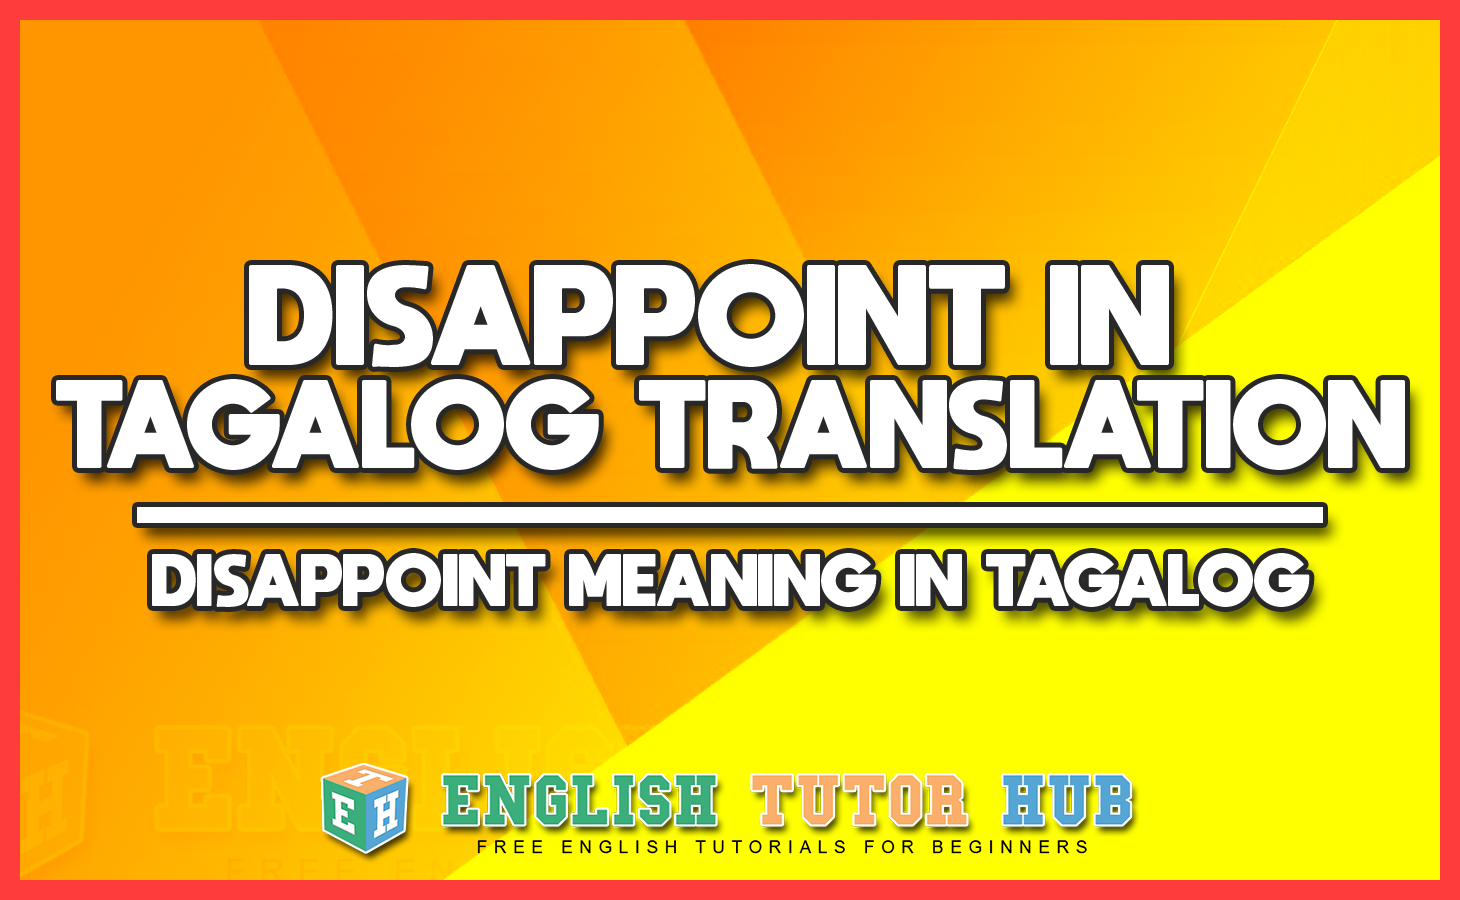 DISAPPOINT IN TAGALOG TRANSLATION